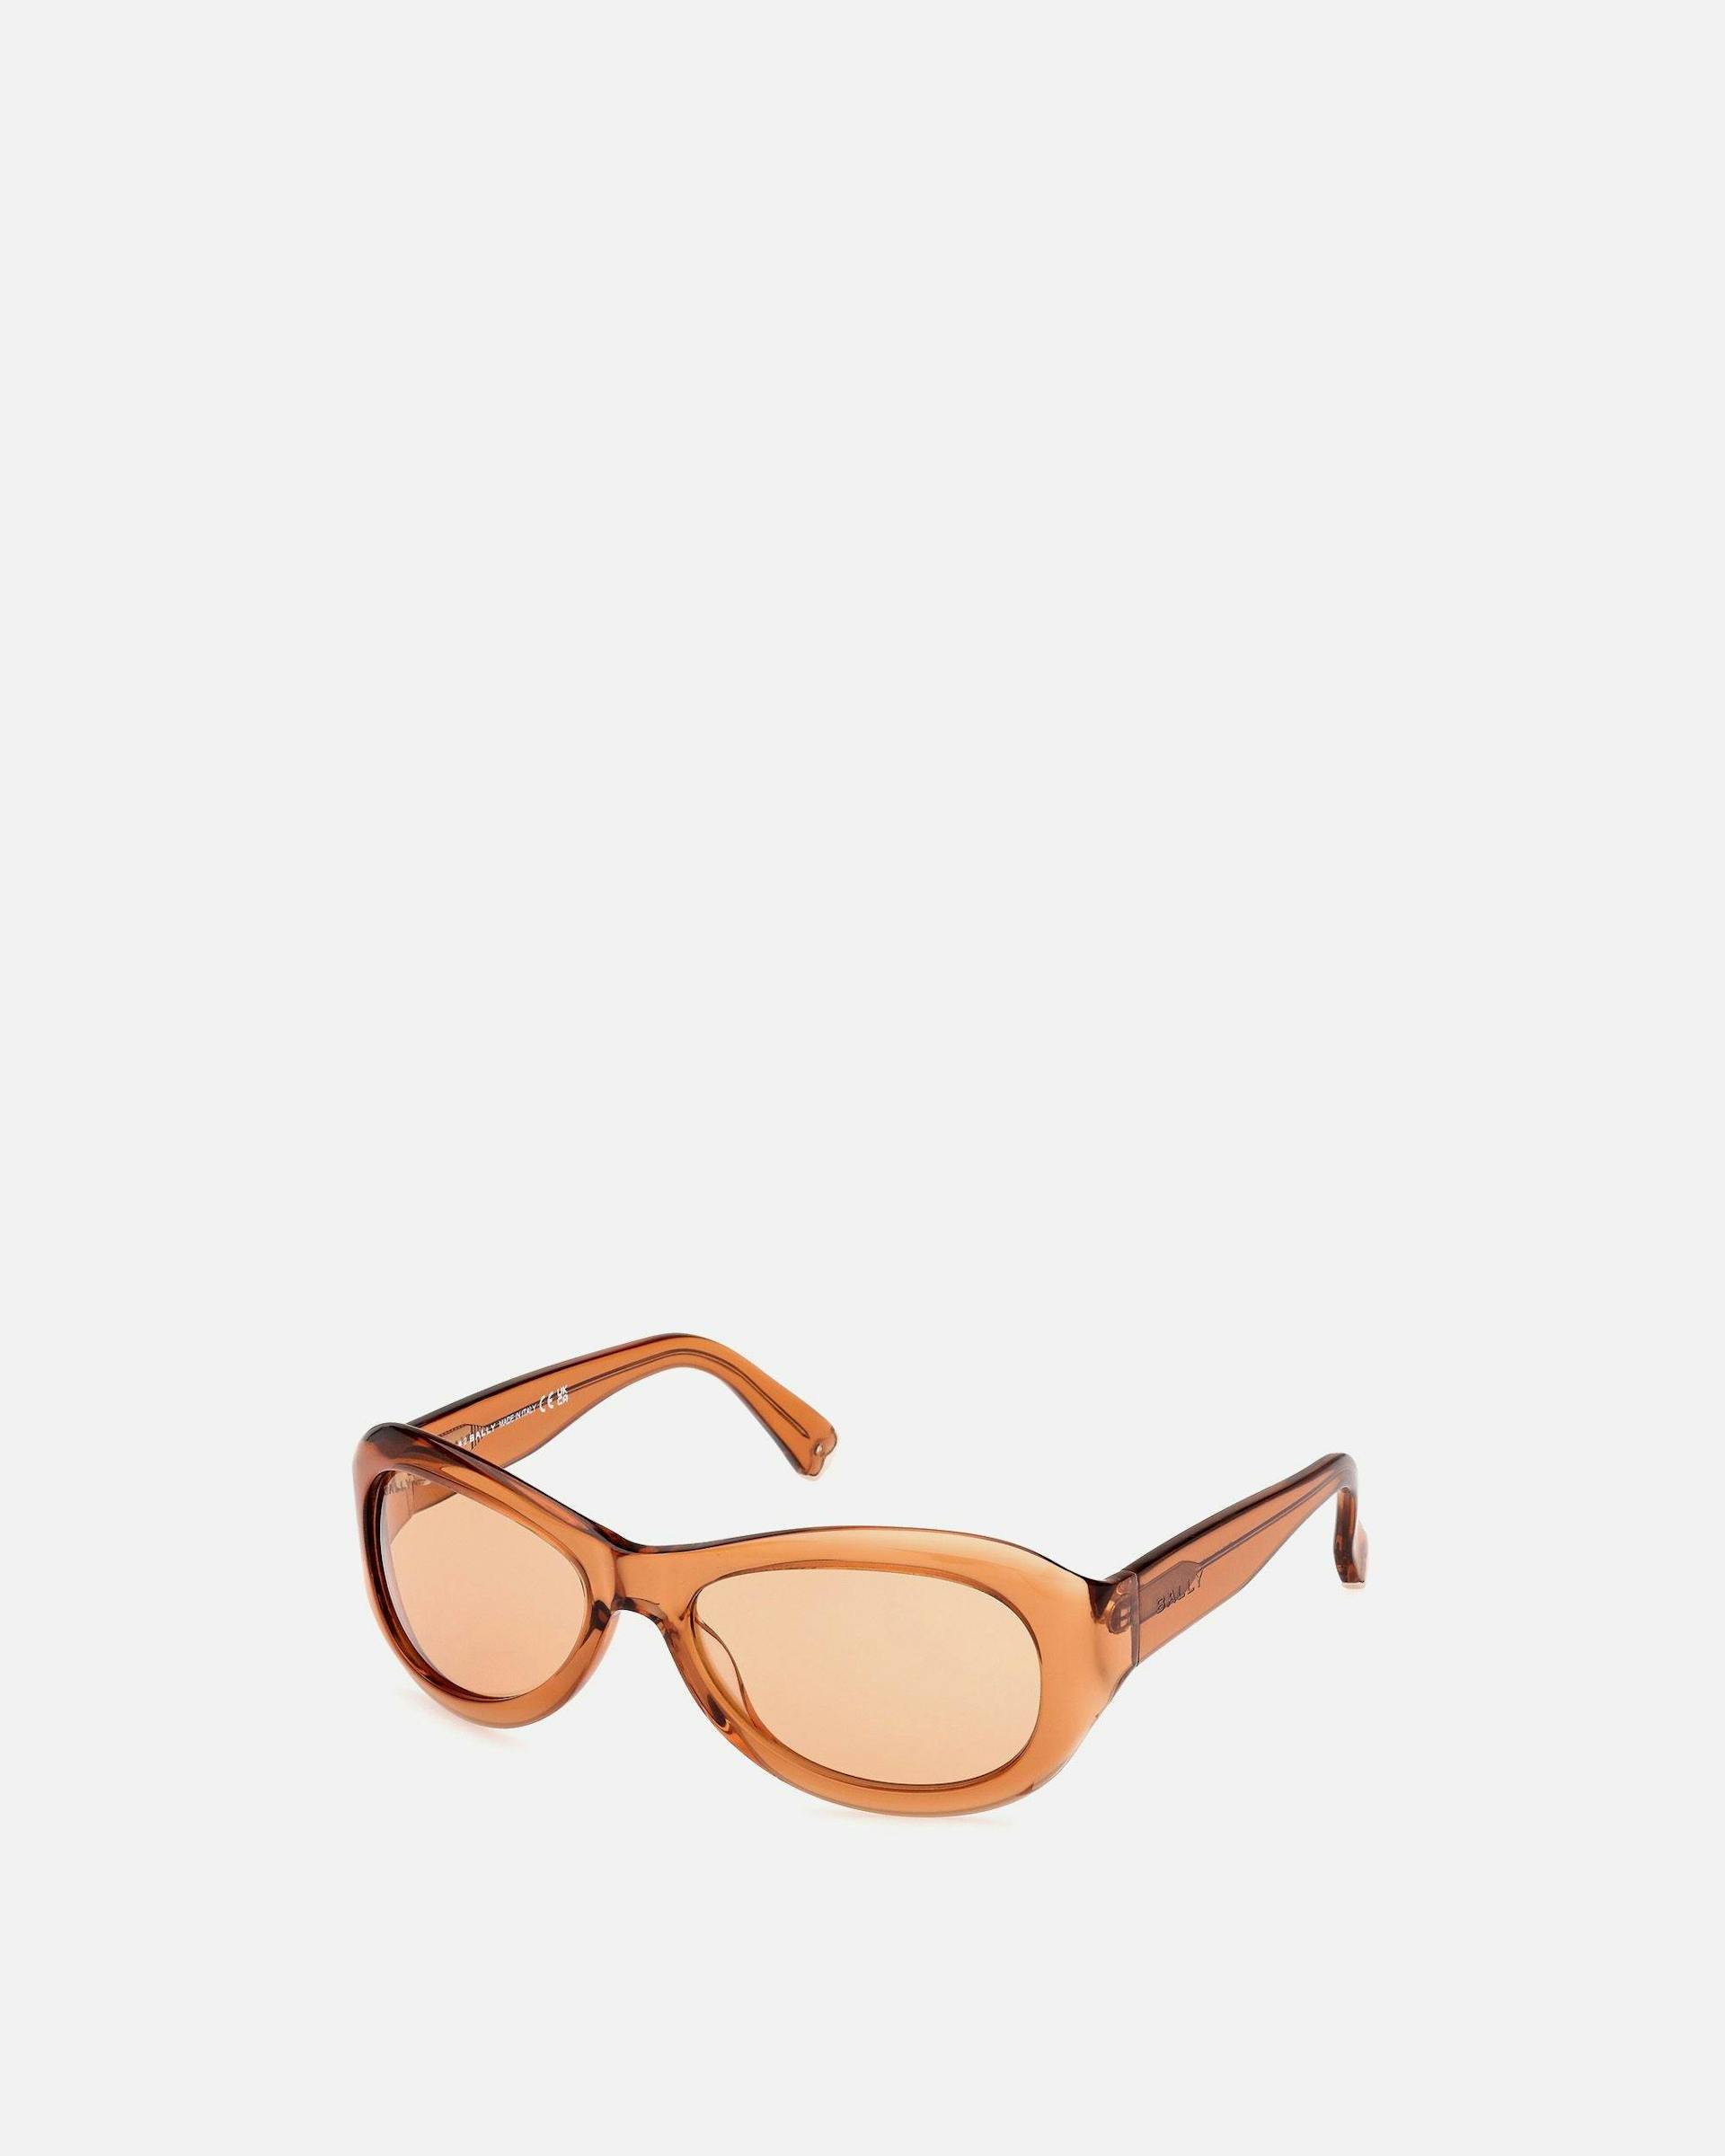 Maurice Acetate Sunglasses in Amber and Orange | Bally | Still Life 3/4 Side